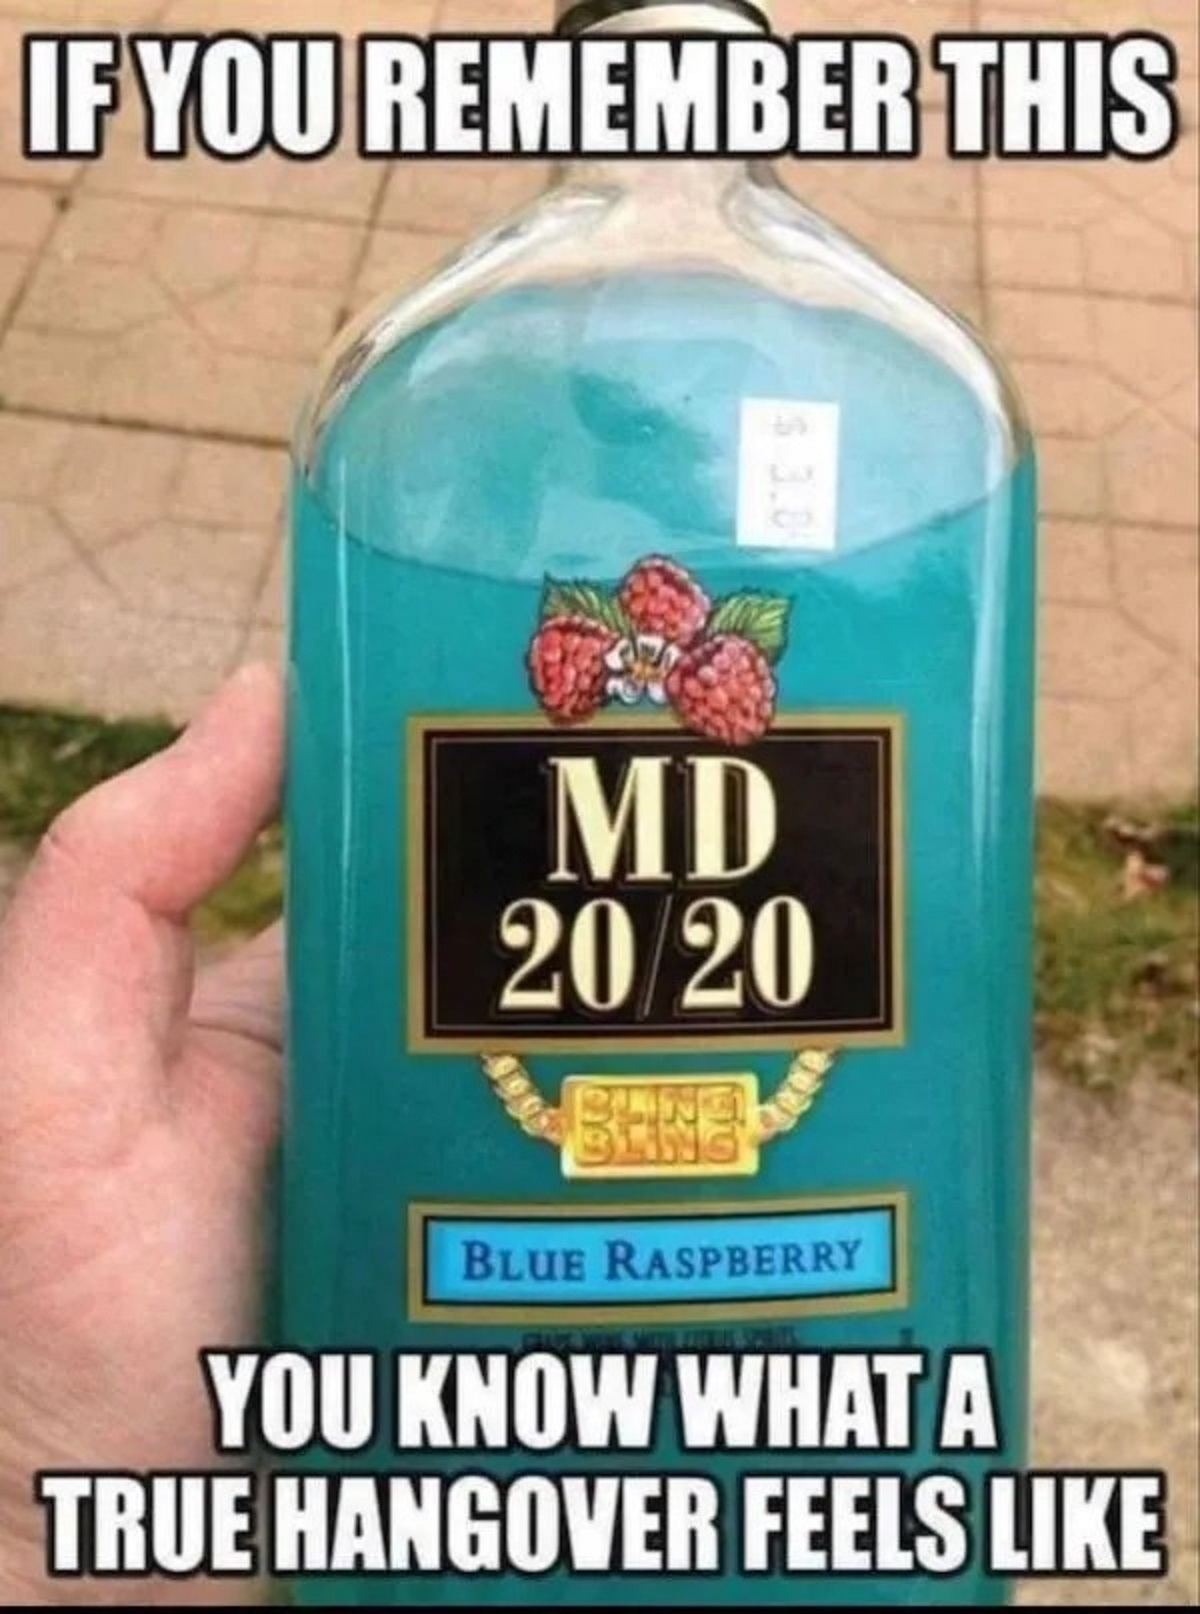 bancha - If You Remember This $ 3.8 Md 2020 Bling Bling Blue Raspberry You Know What A True Hangover Feels